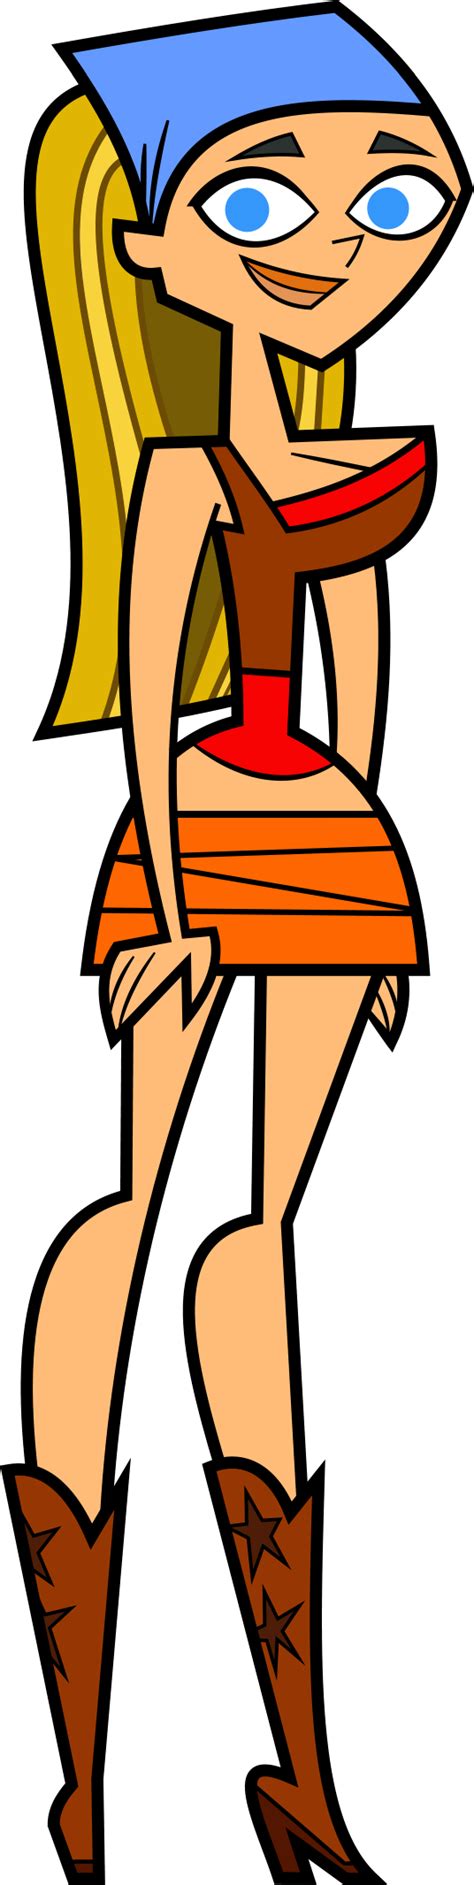 Total Drama Island Lindsay By Tjgraphics1999 On Deviantart Total Drama Island My Little